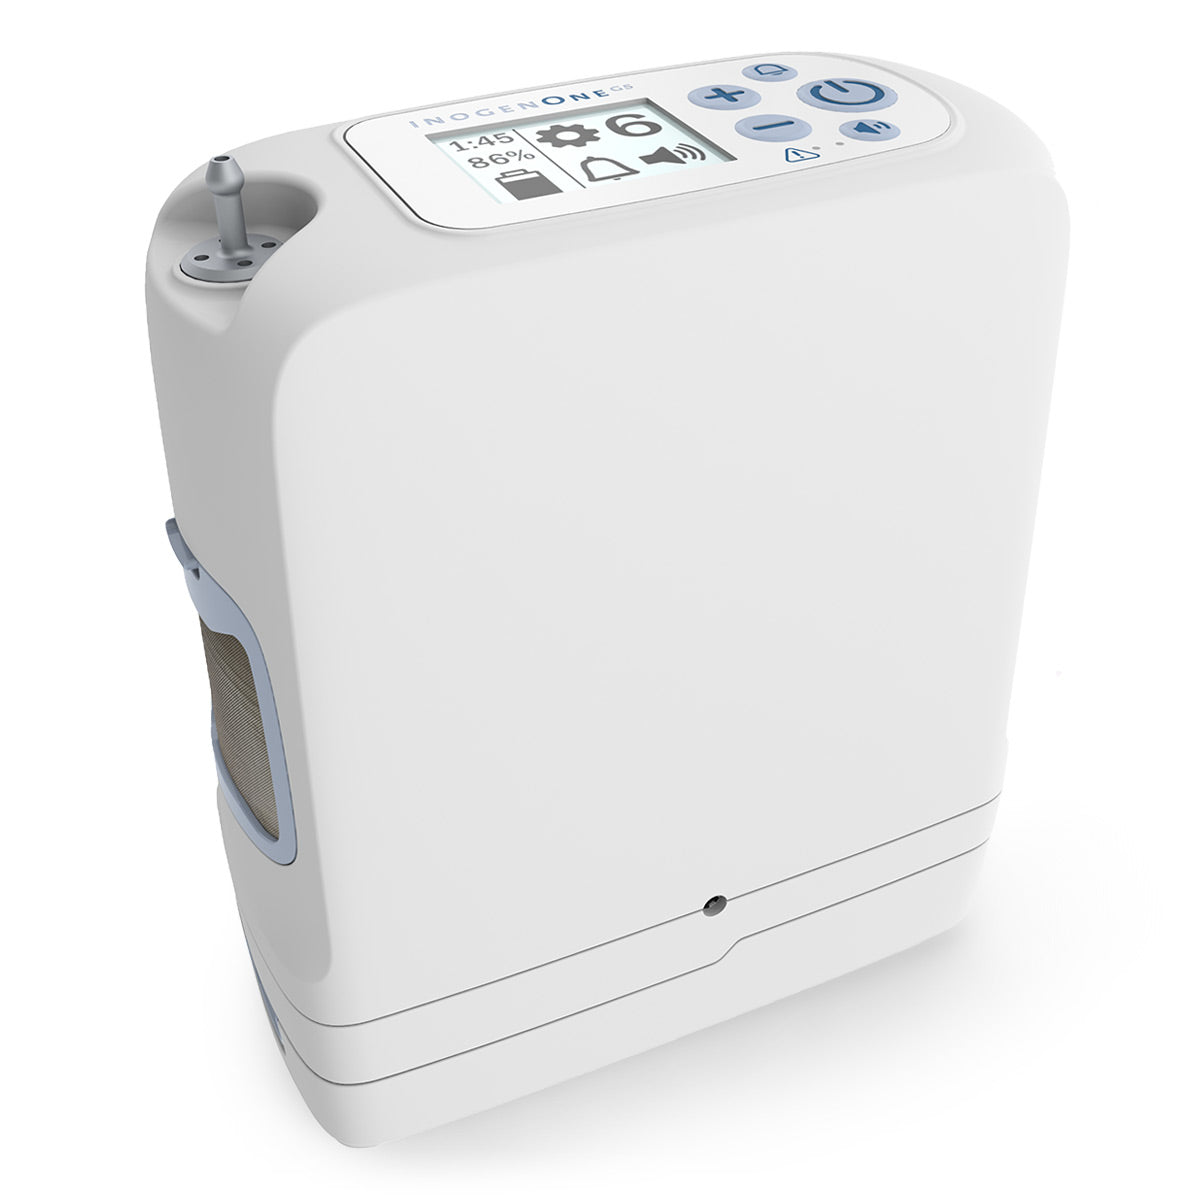 Inogen One G5 Portable Oxygen Concentrator Package (Pulse Dose)